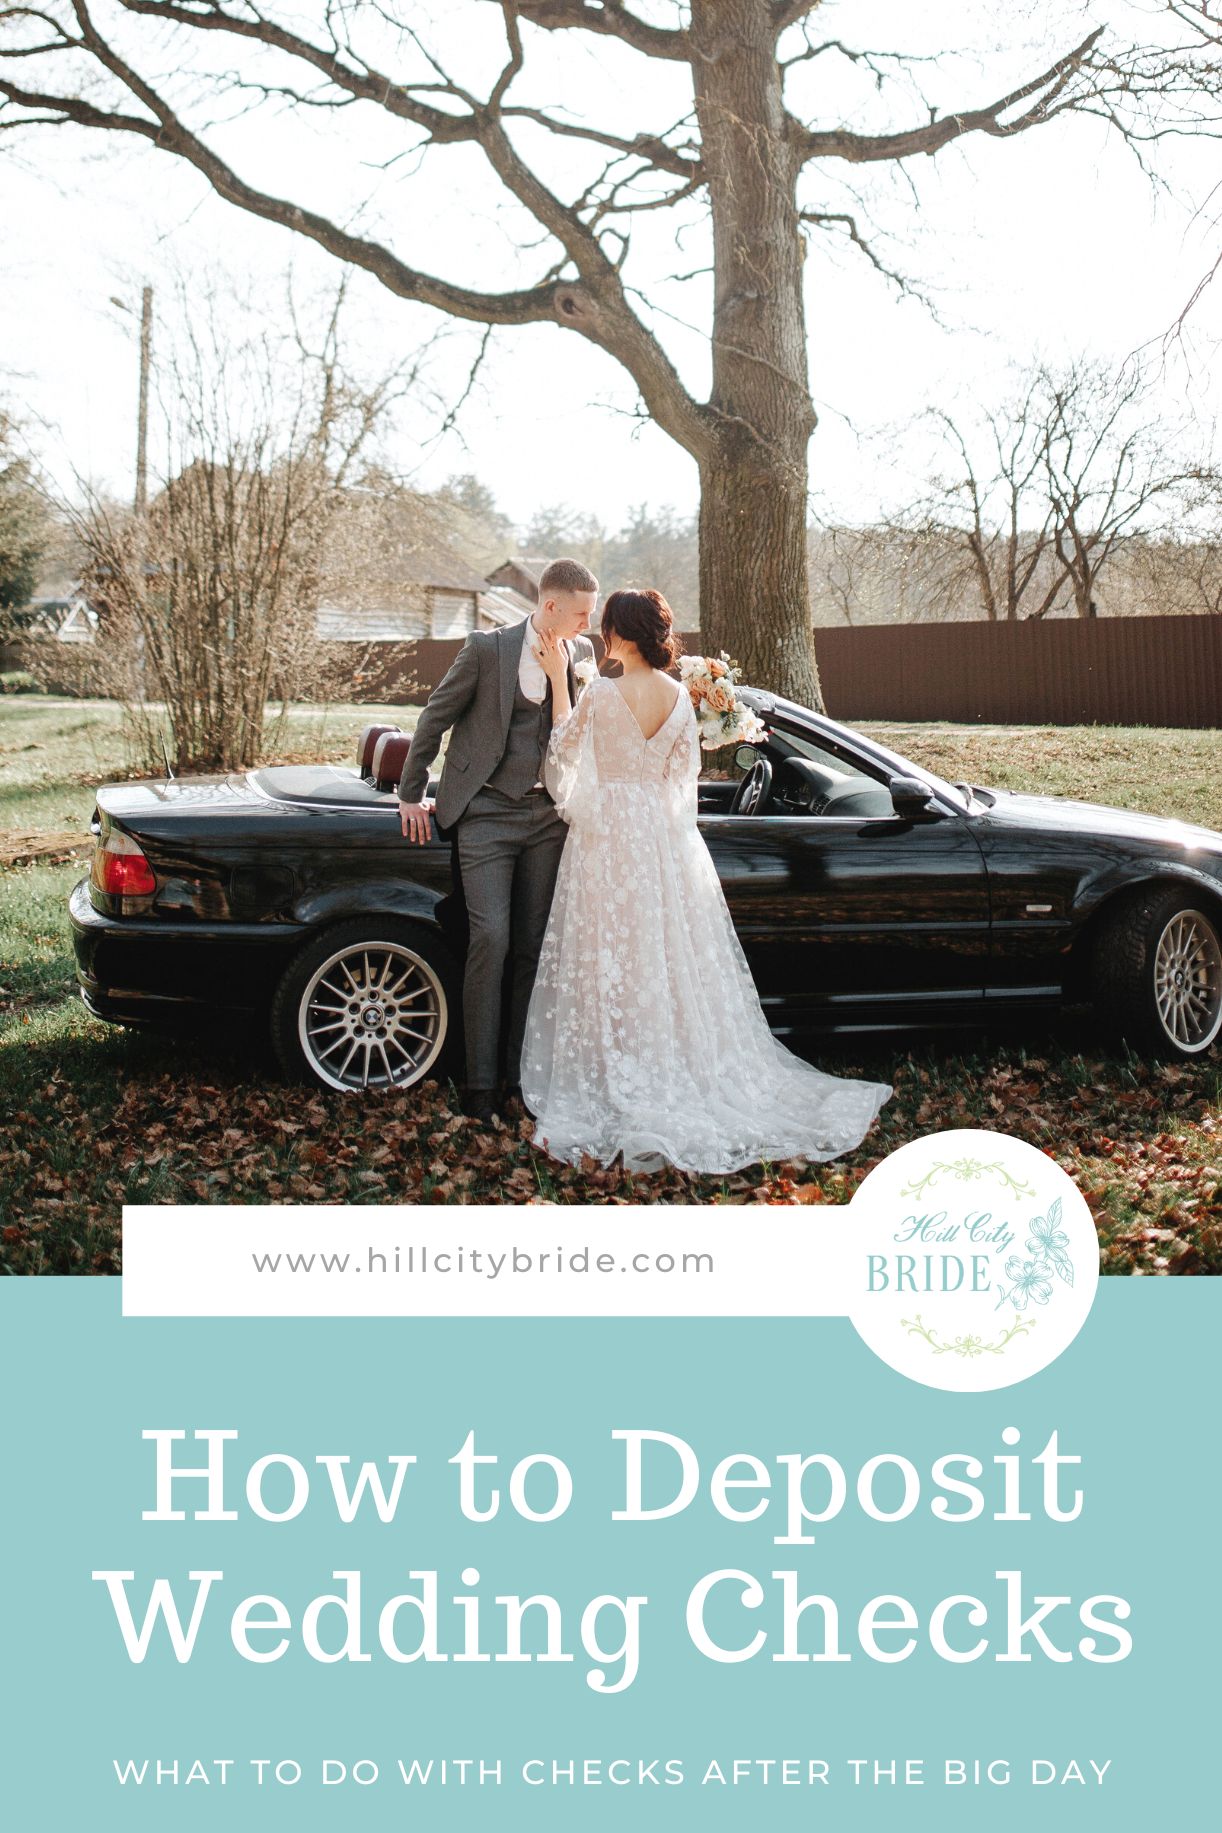 How to Deposit Checks After the Wedding